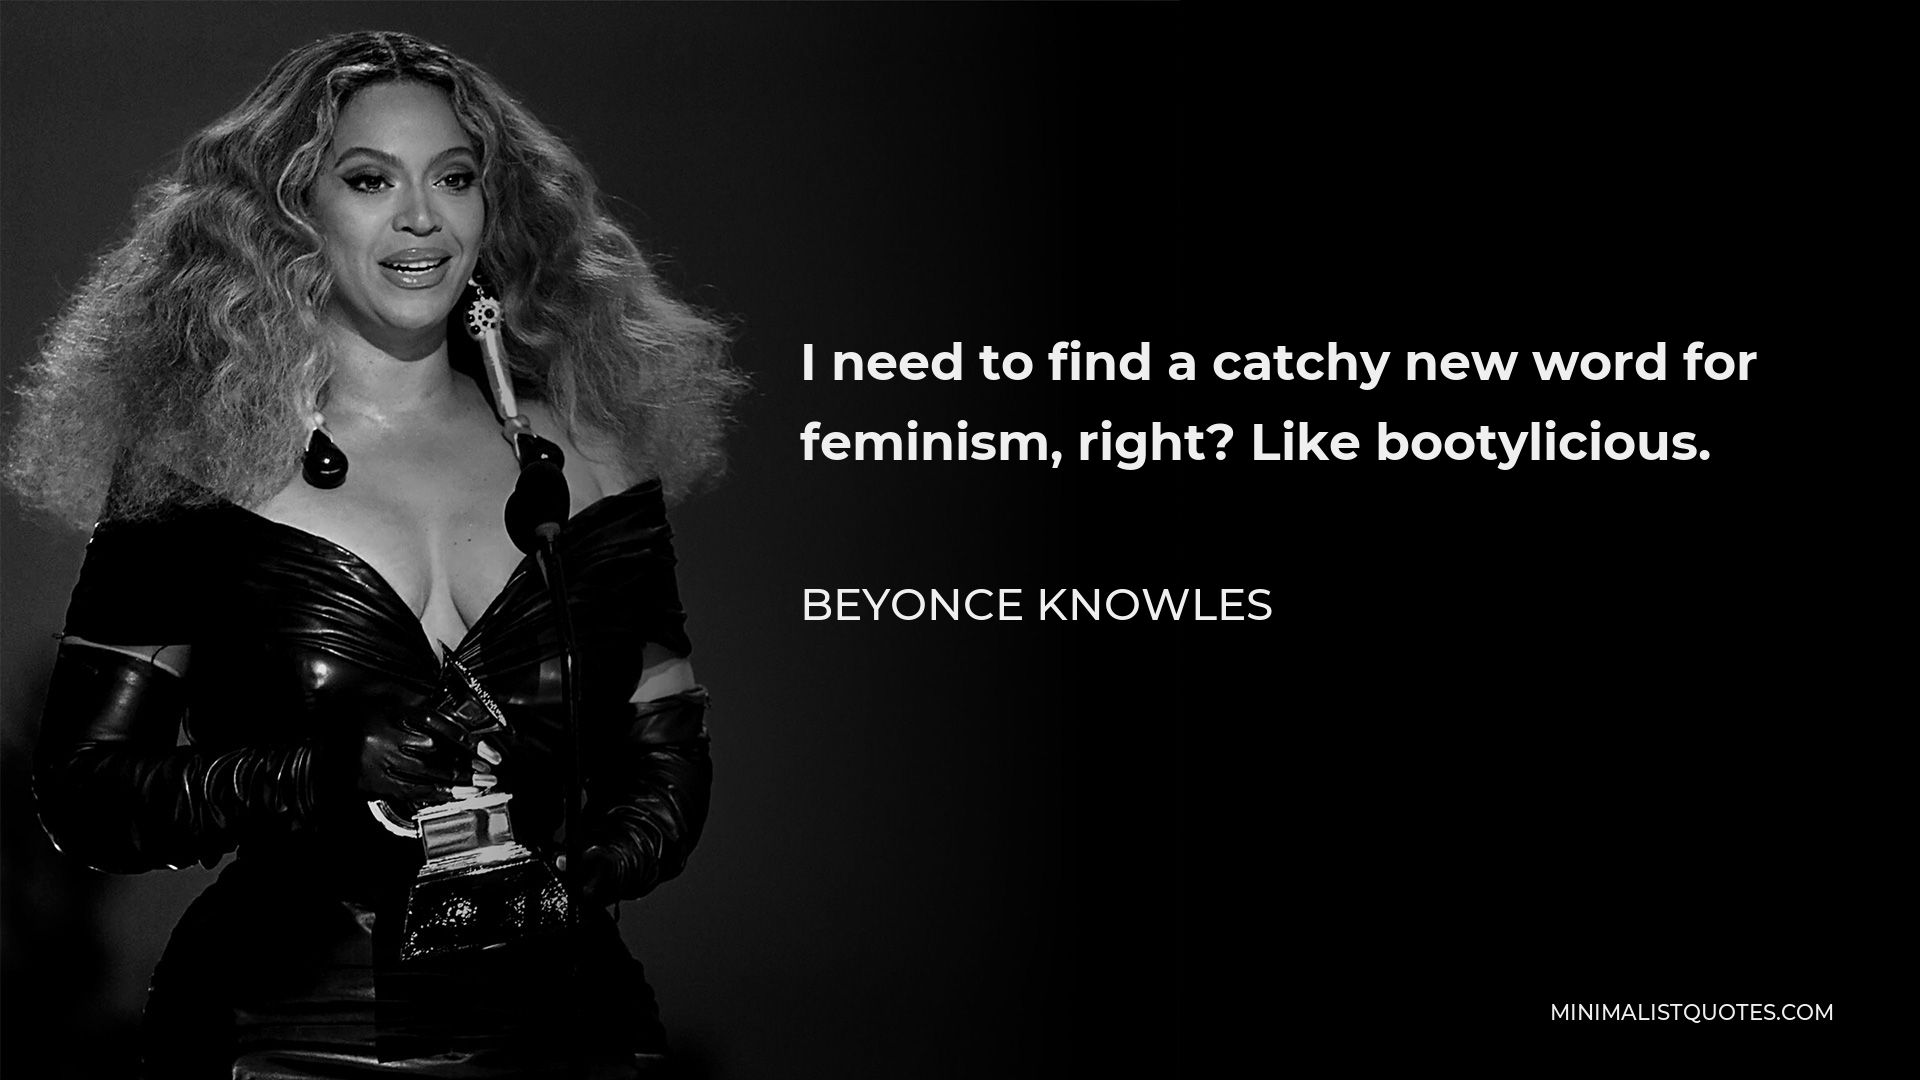 Beyonce Knowles Quote - I need to find a catchy new word for feminism, right? Like bootylicious.